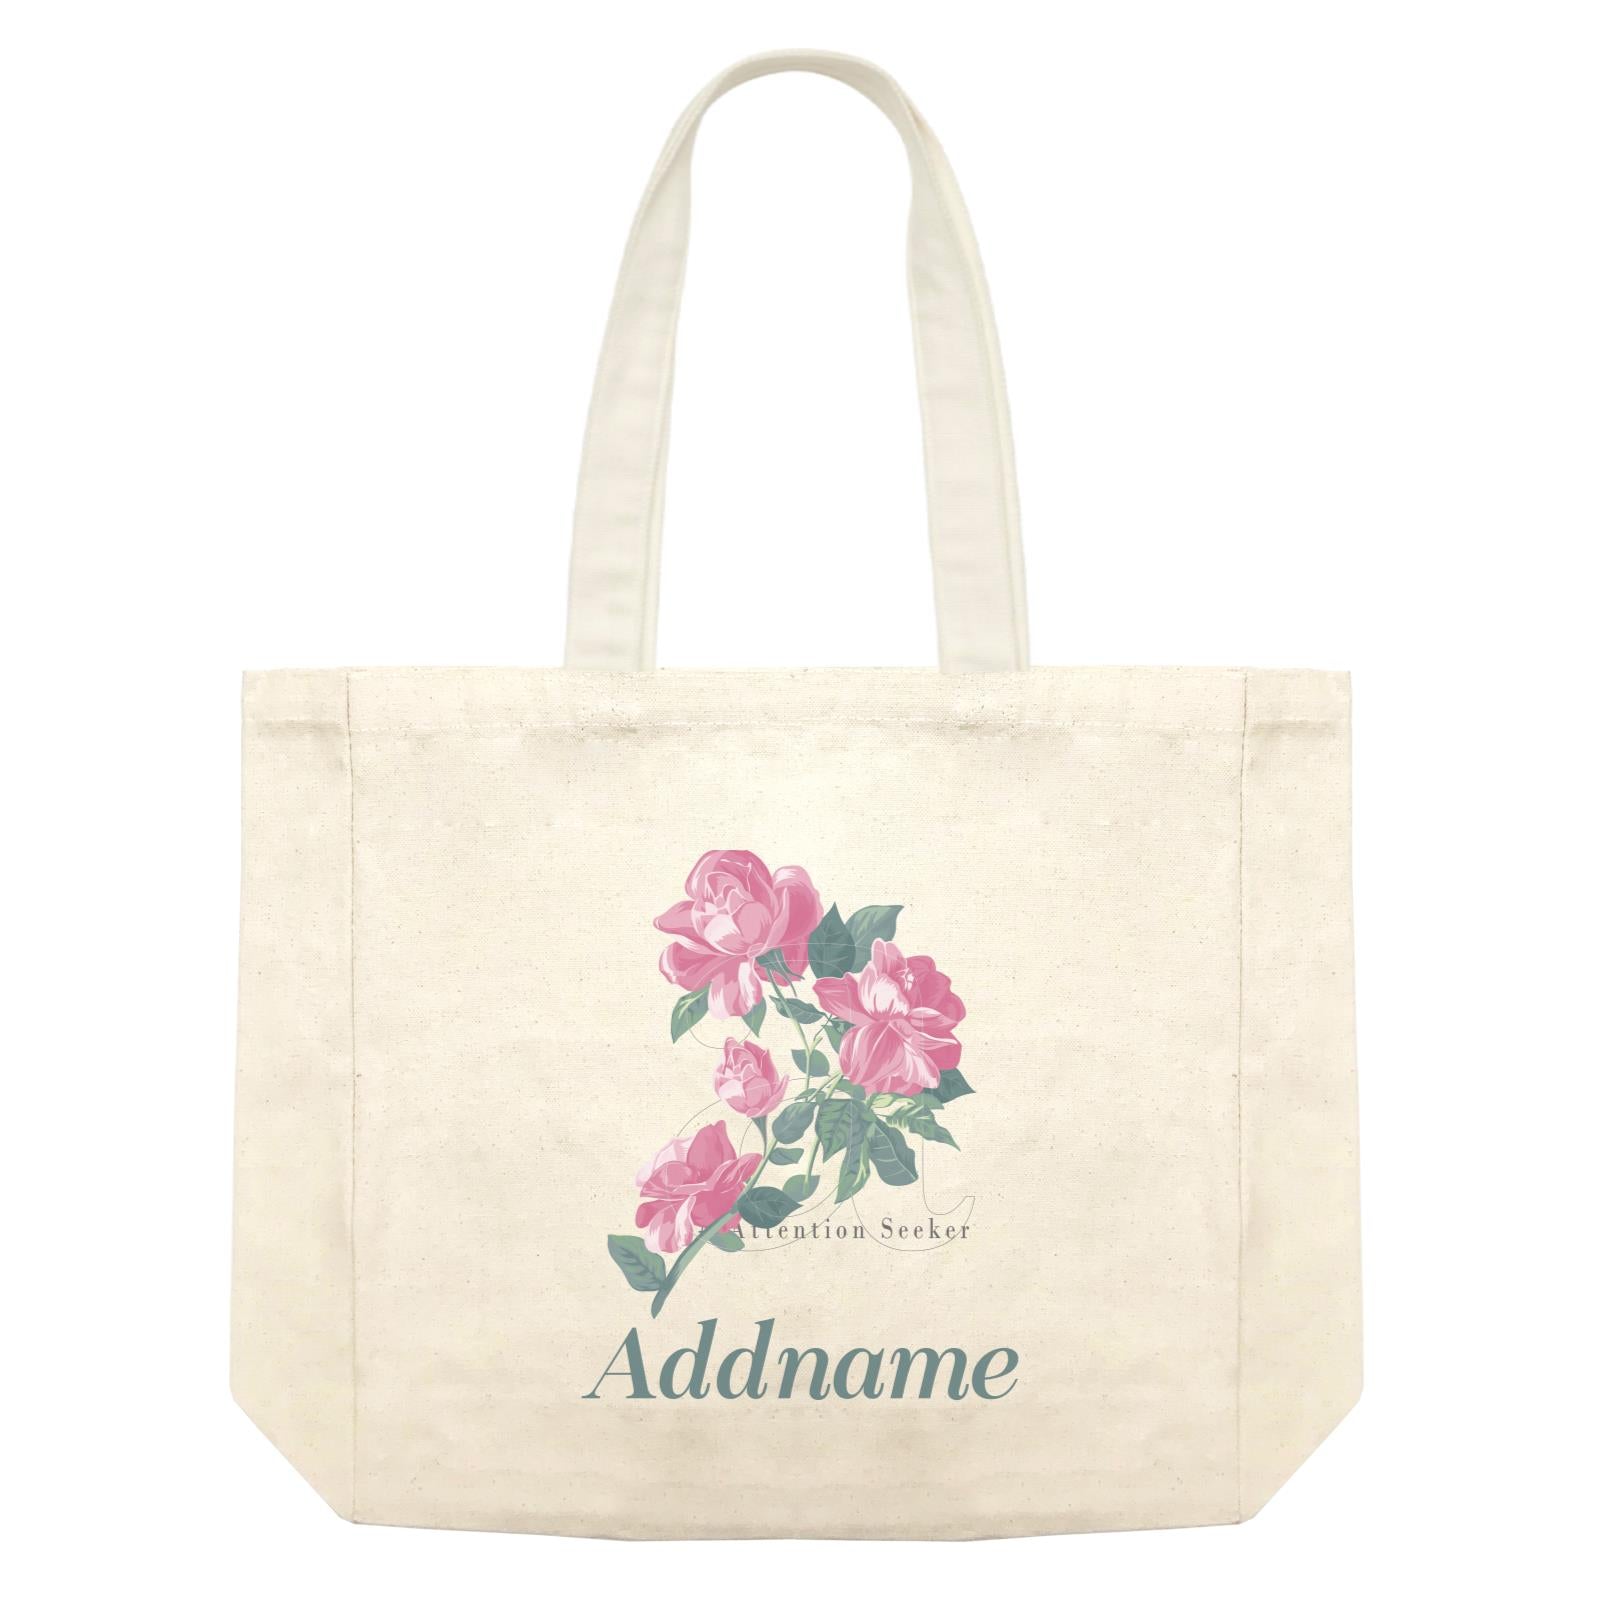 Cool Chic Flowers Pink Roses Attention Seekers With Addname Shopping Bag